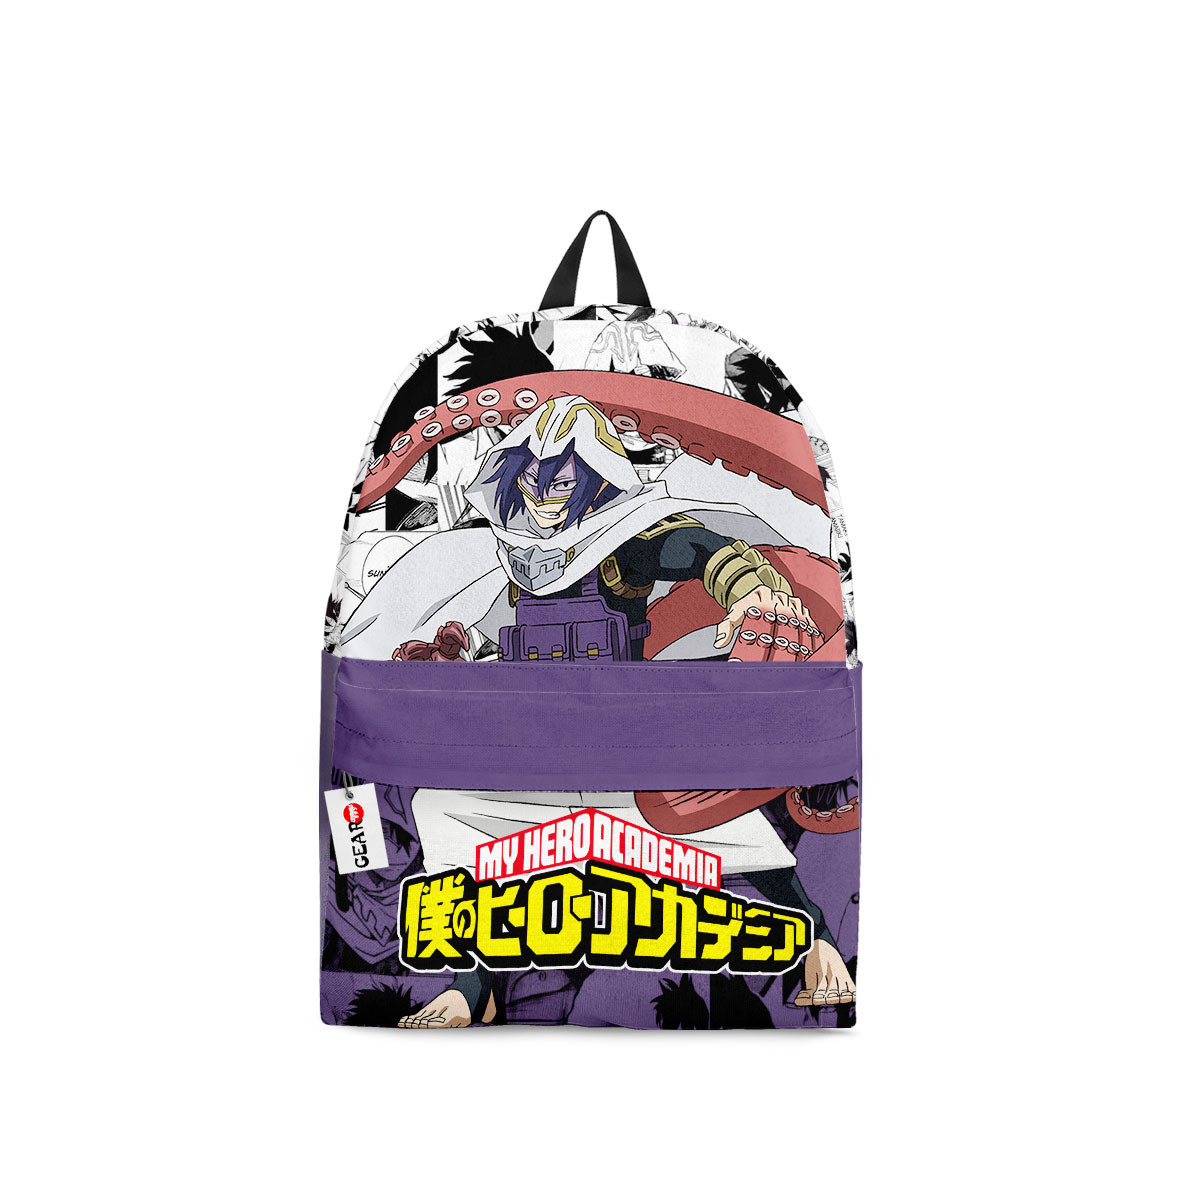 Latest Anime style products 253